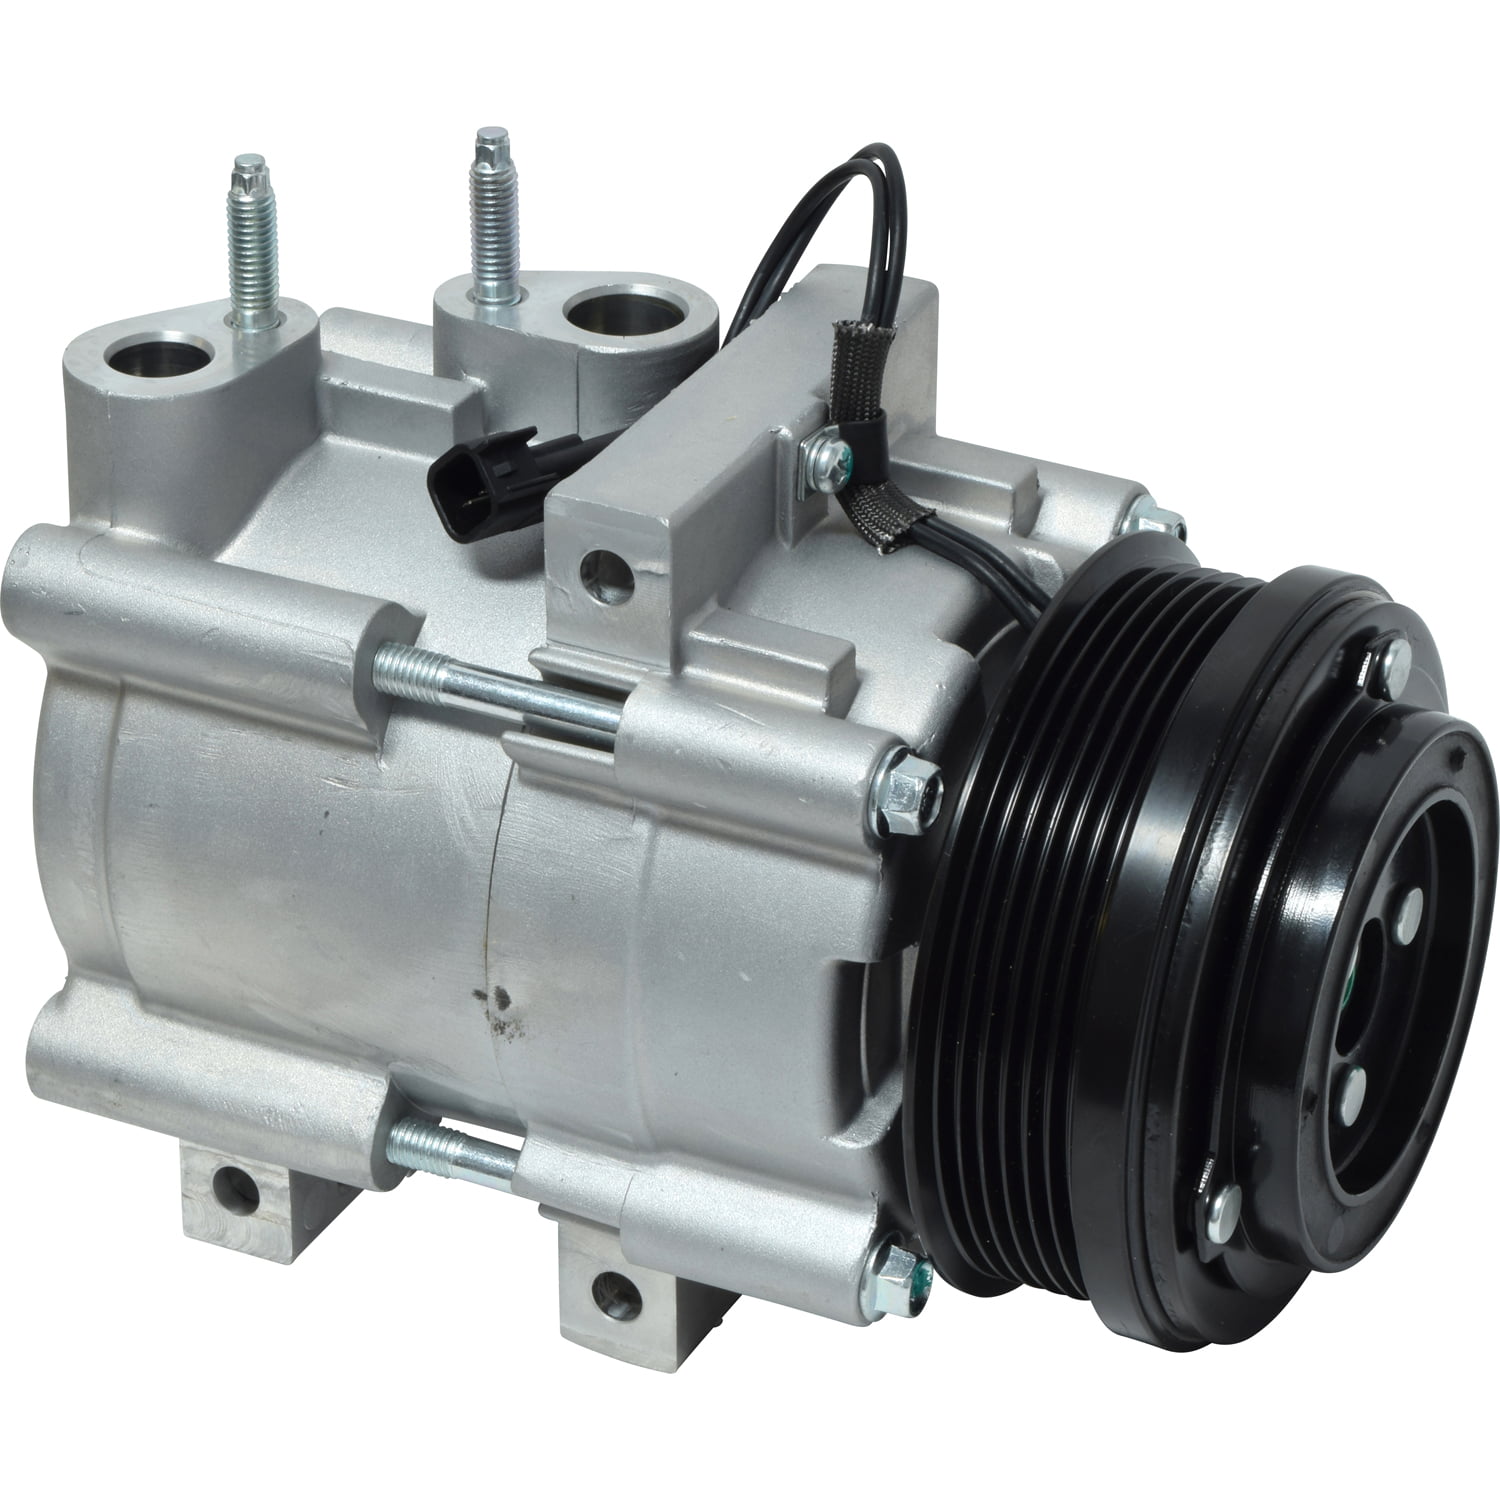 NEW AC COMPRESSOR FORD MUSTANG 2010 2009 2008 2007